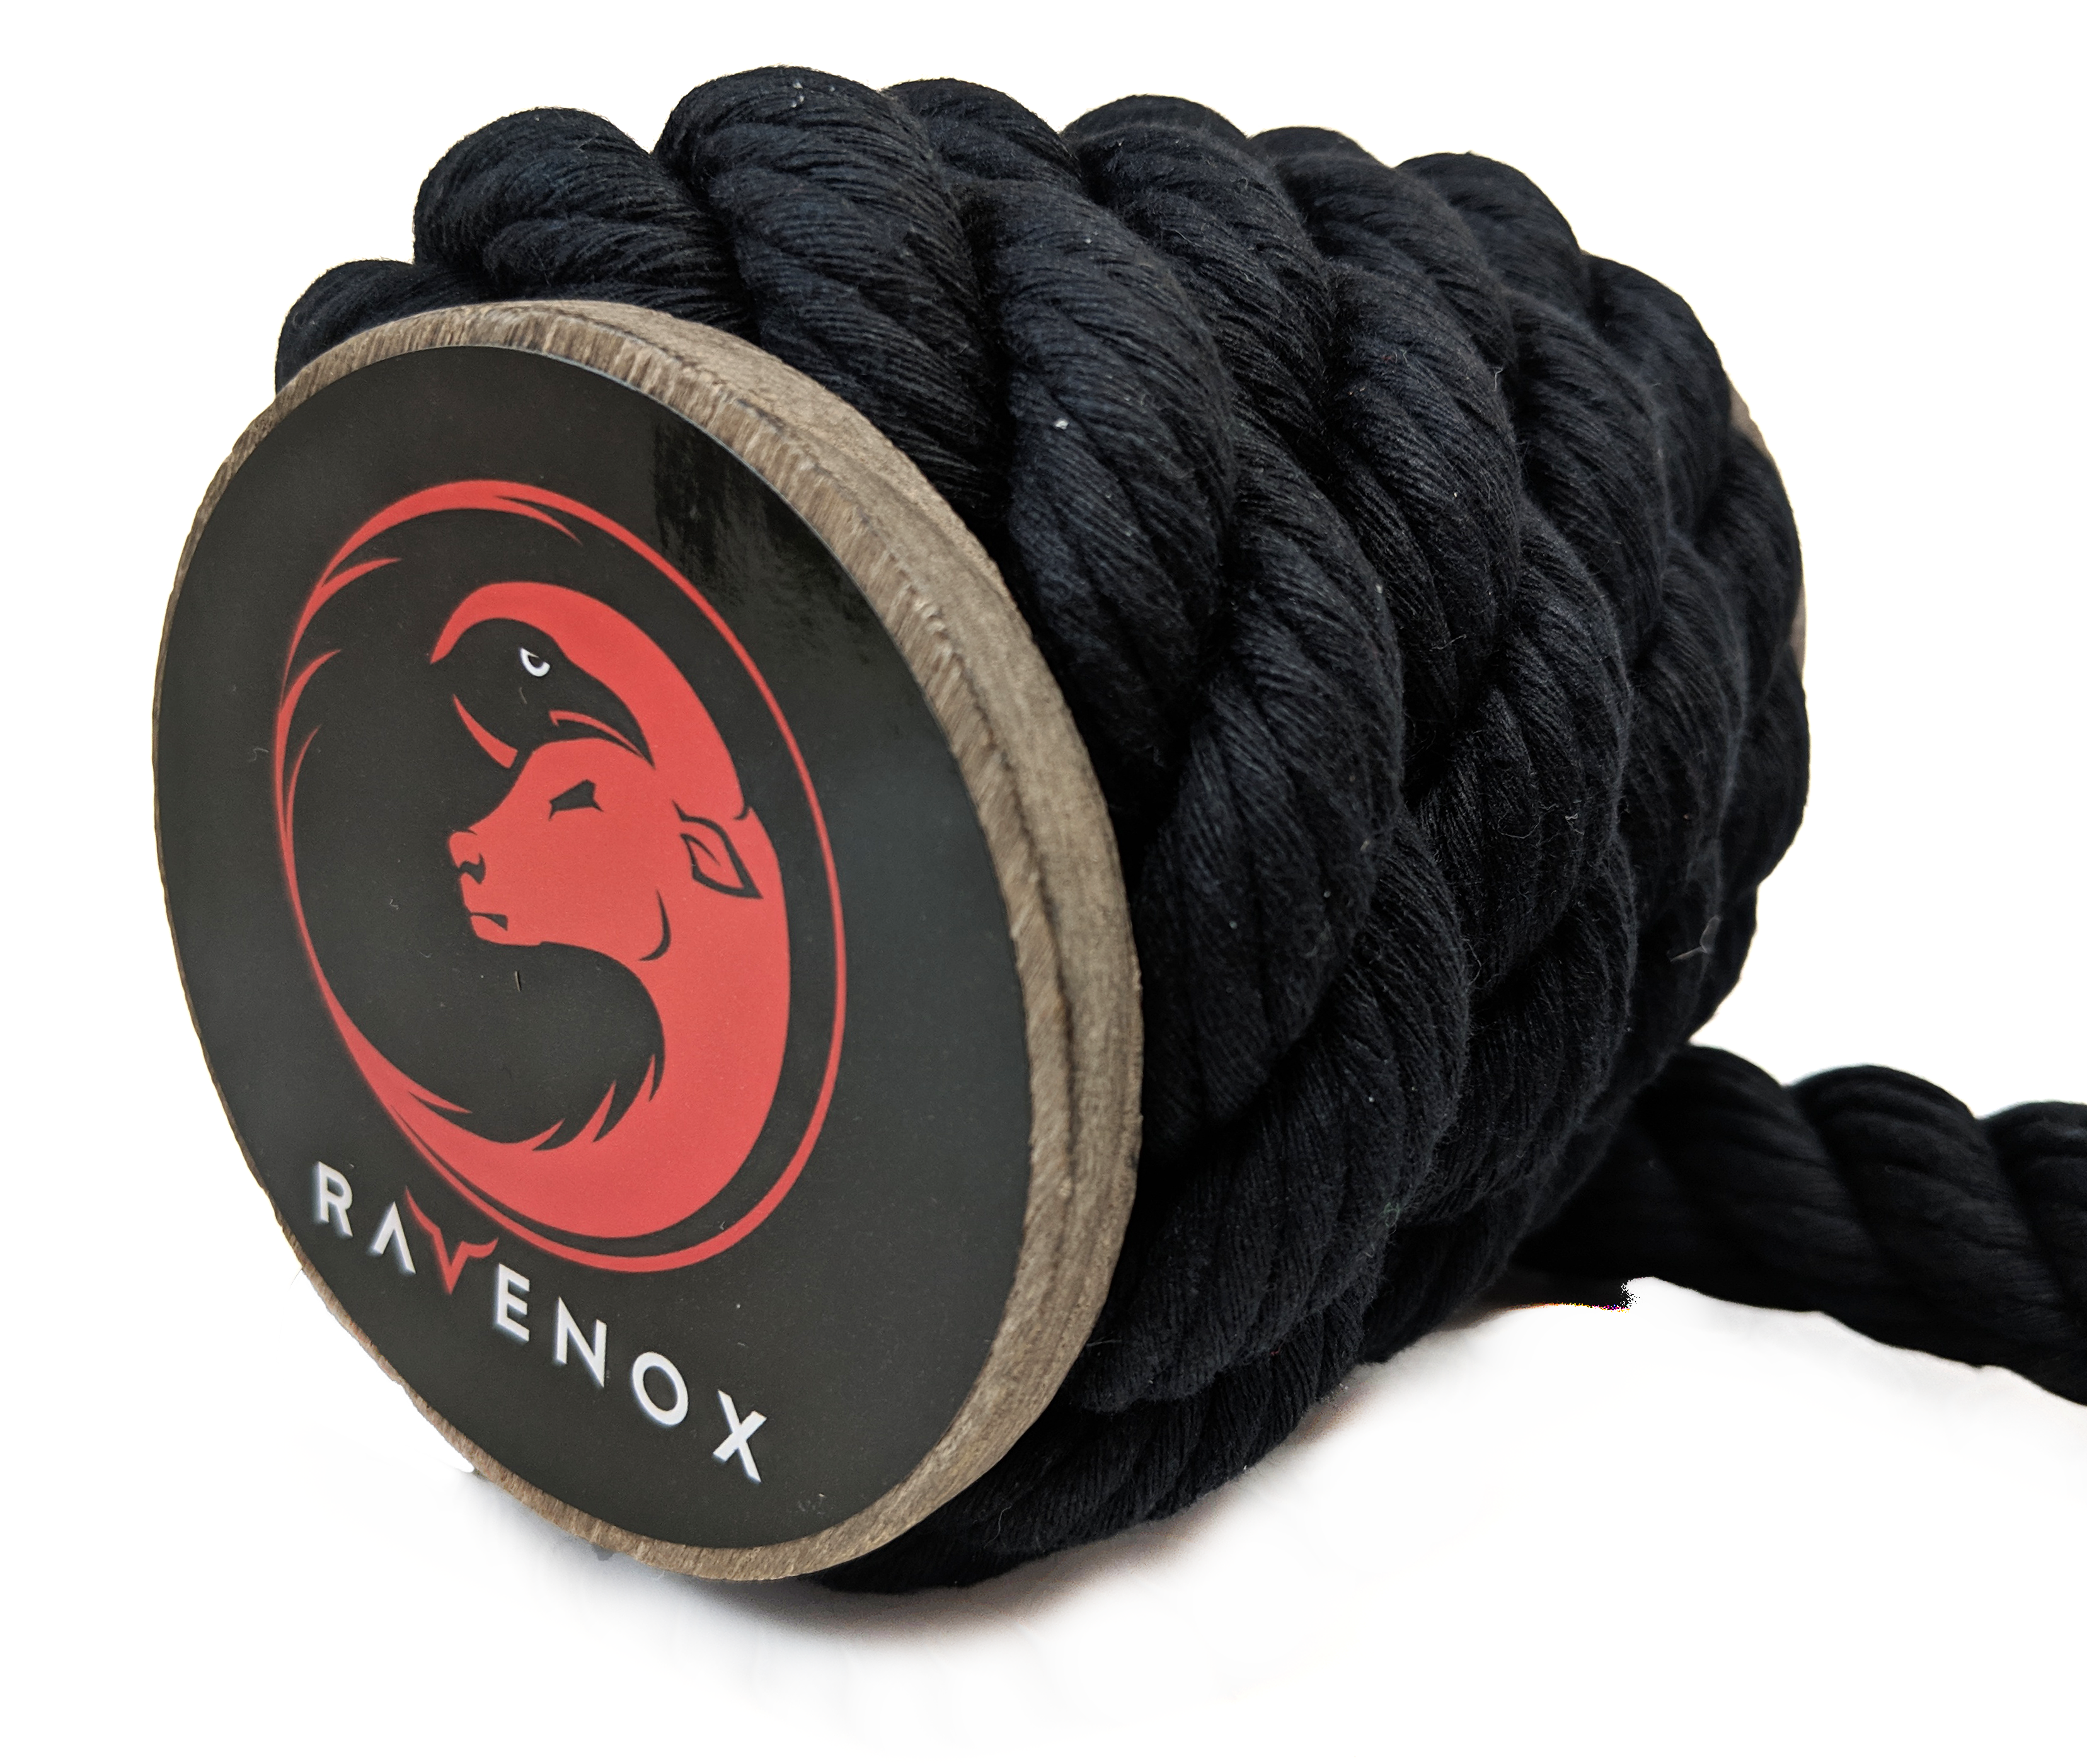 Ravenox Hot Pink Cotton Rope  Soft, Strong, & Affordable Cord